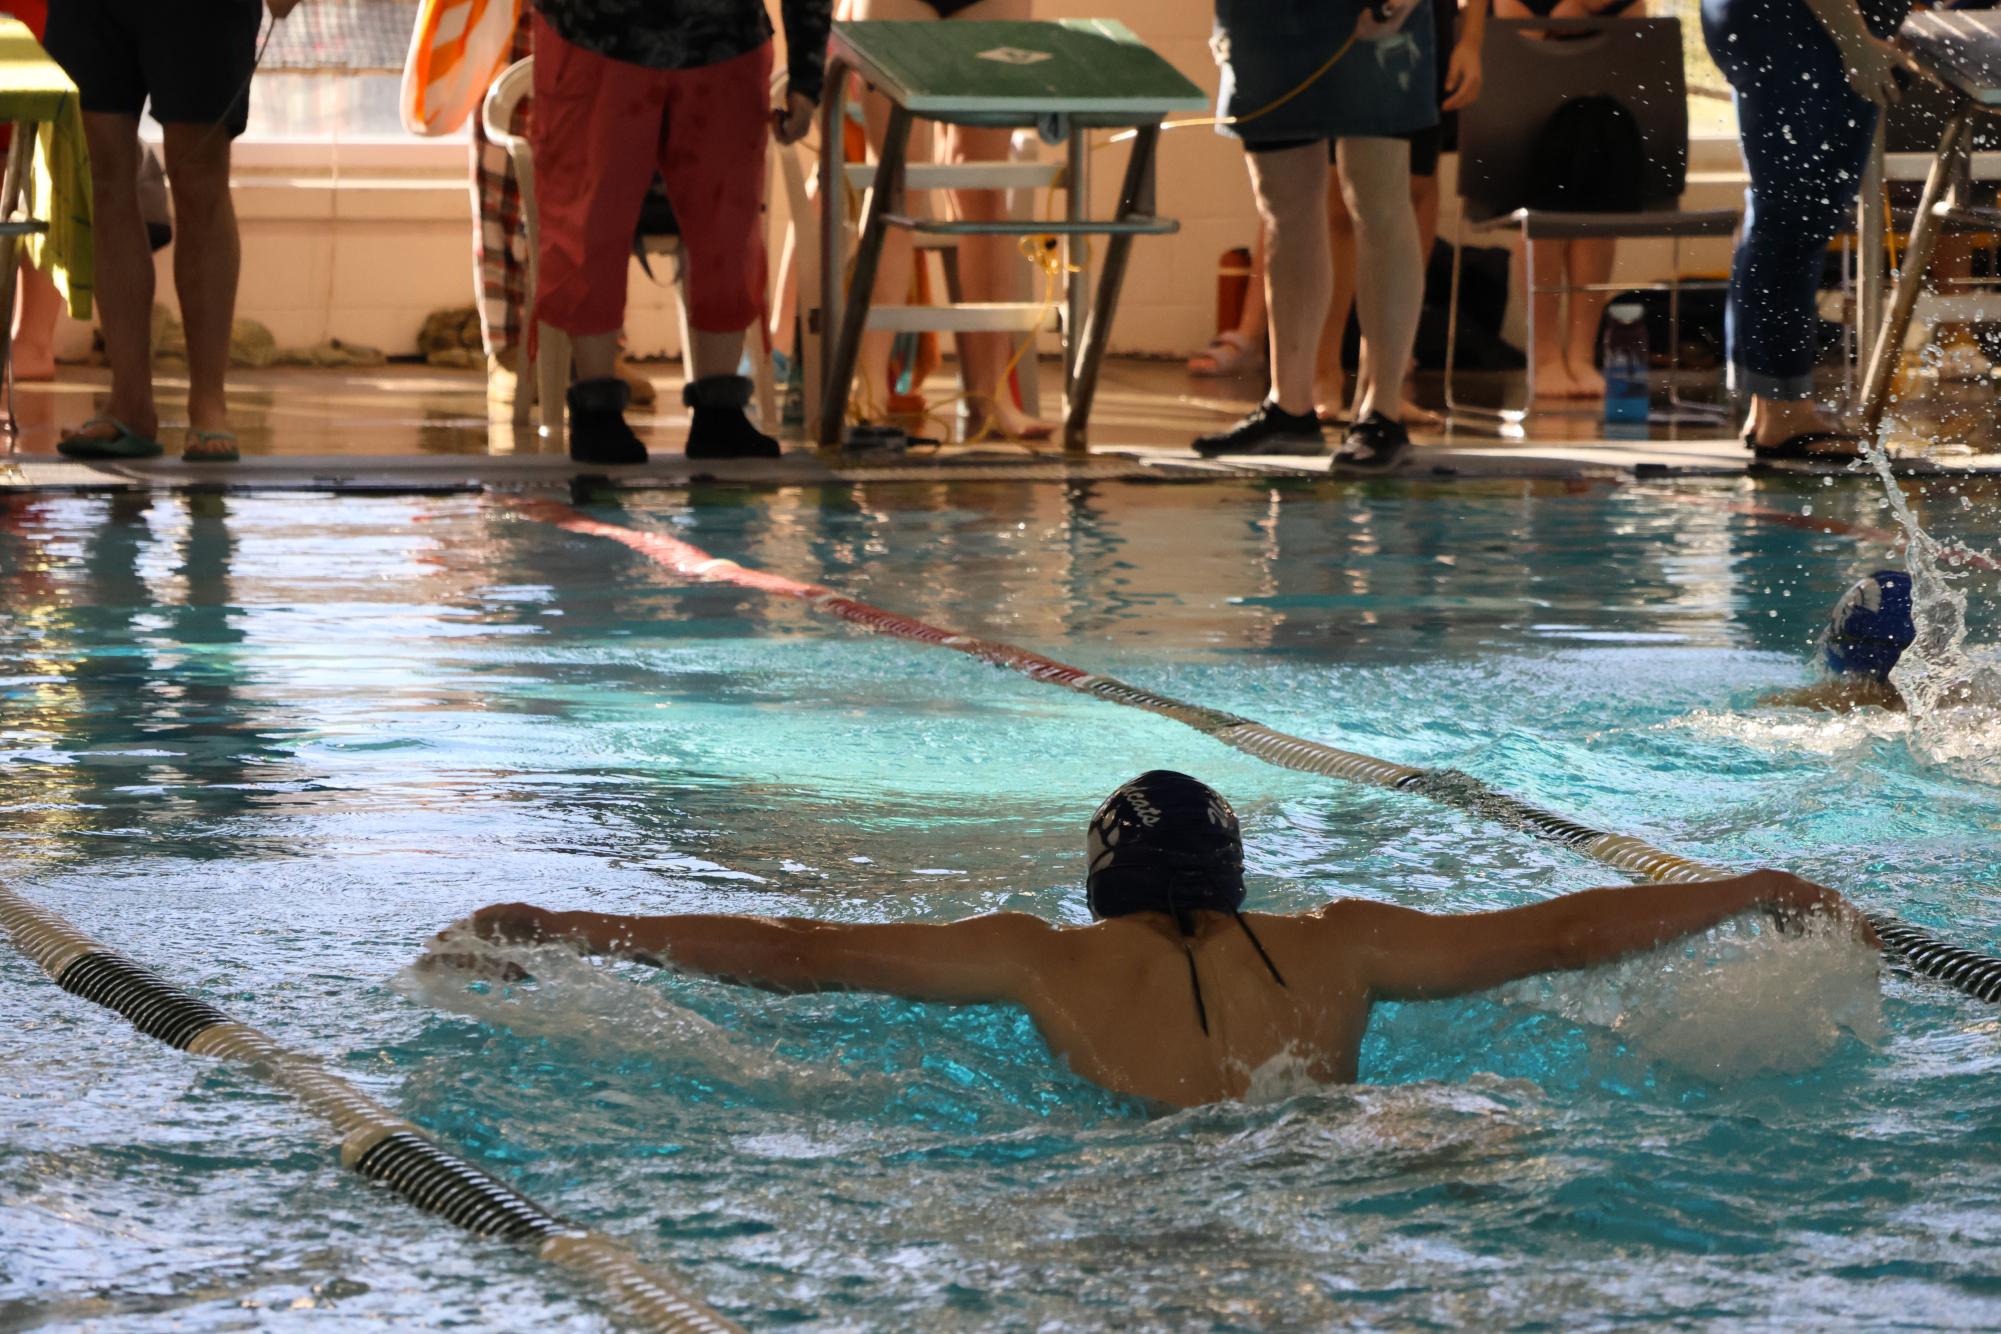 Photo+Story%3A+Varsity+Swim+Teams+Take+On+Districts+at+Parkrose+High+School